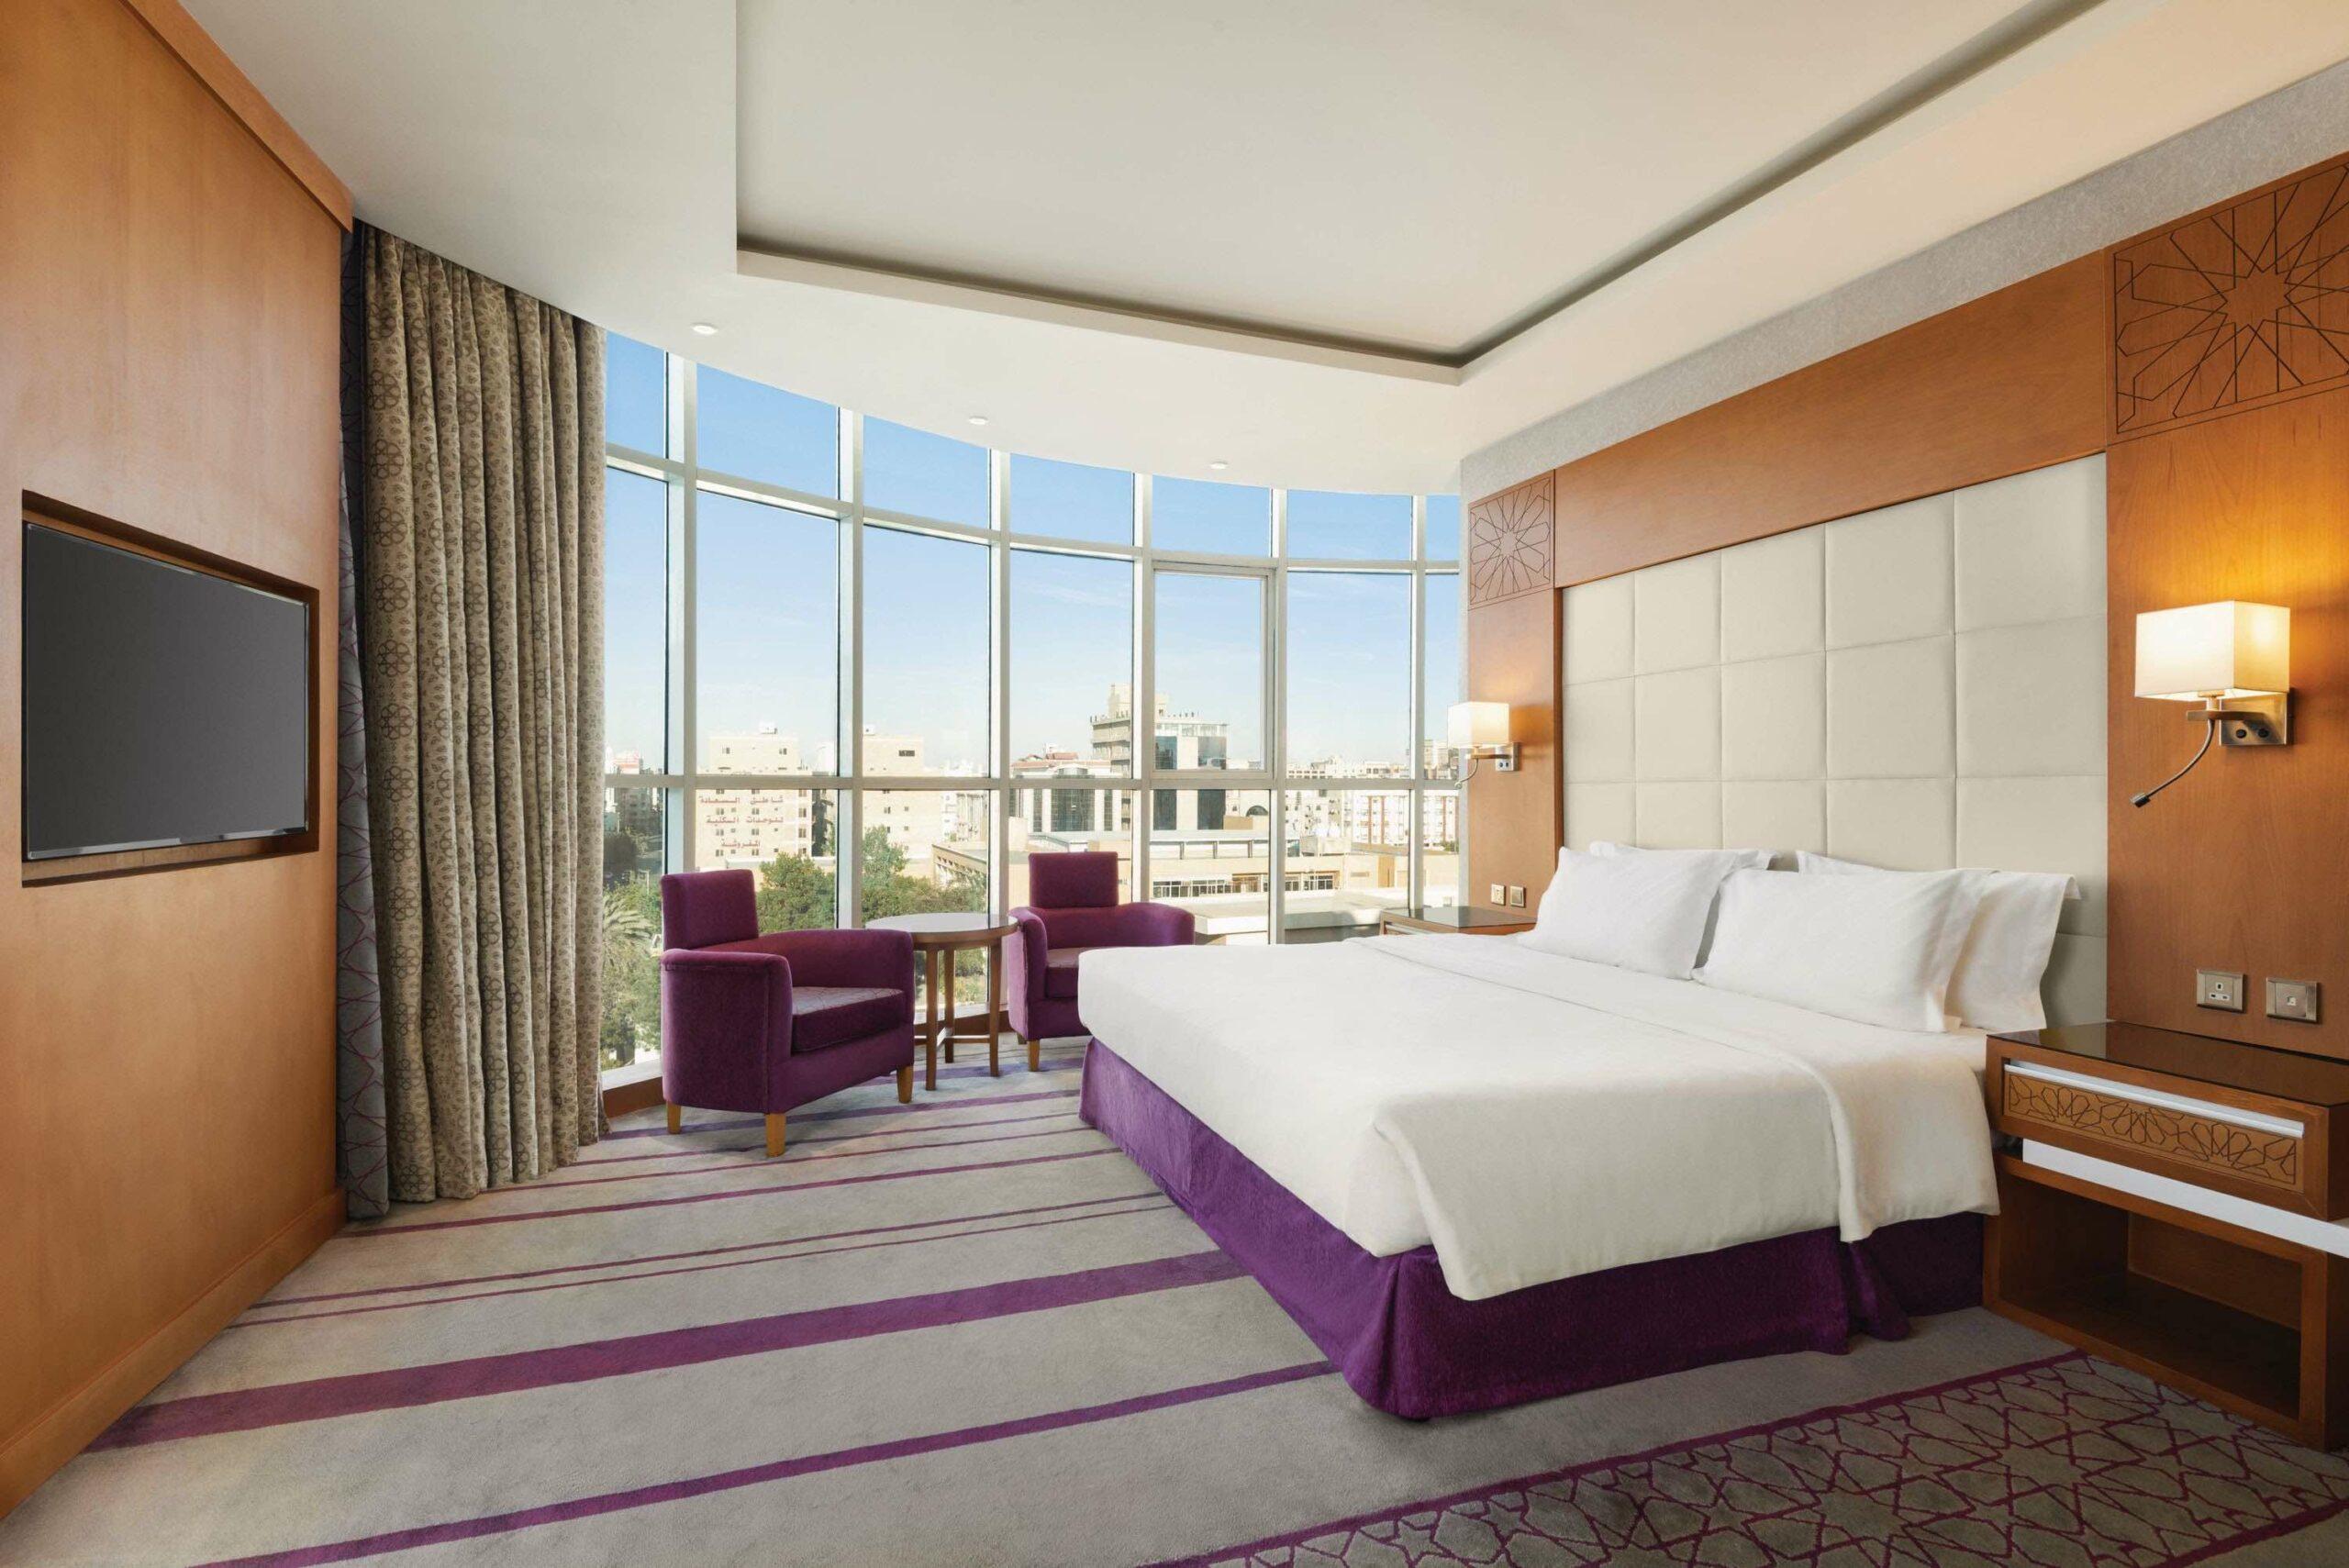 Radisson Individuals makes its Middle East debut with Vivid Jeddah Hotel